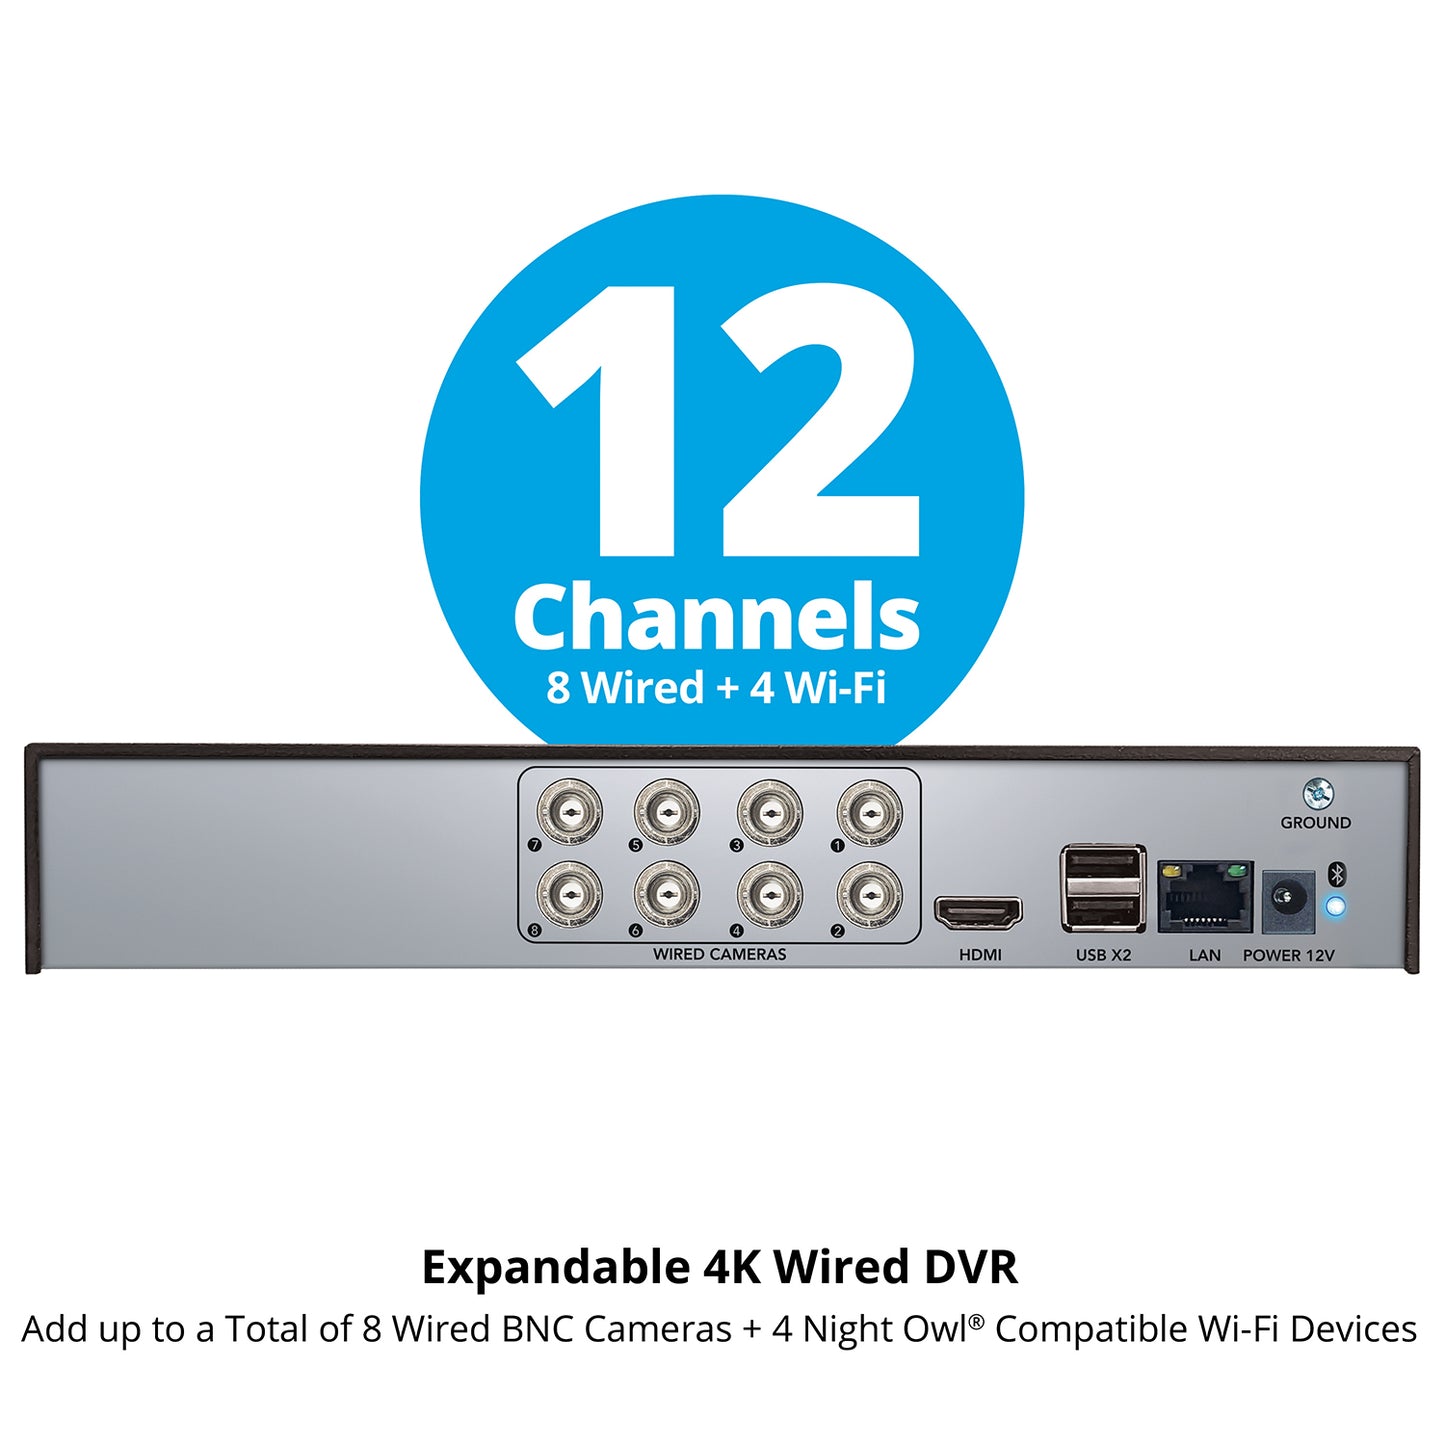 2-Way Audio 12 Channel 4K DVR with Customizable Storage - Add up to 12 Total Devices